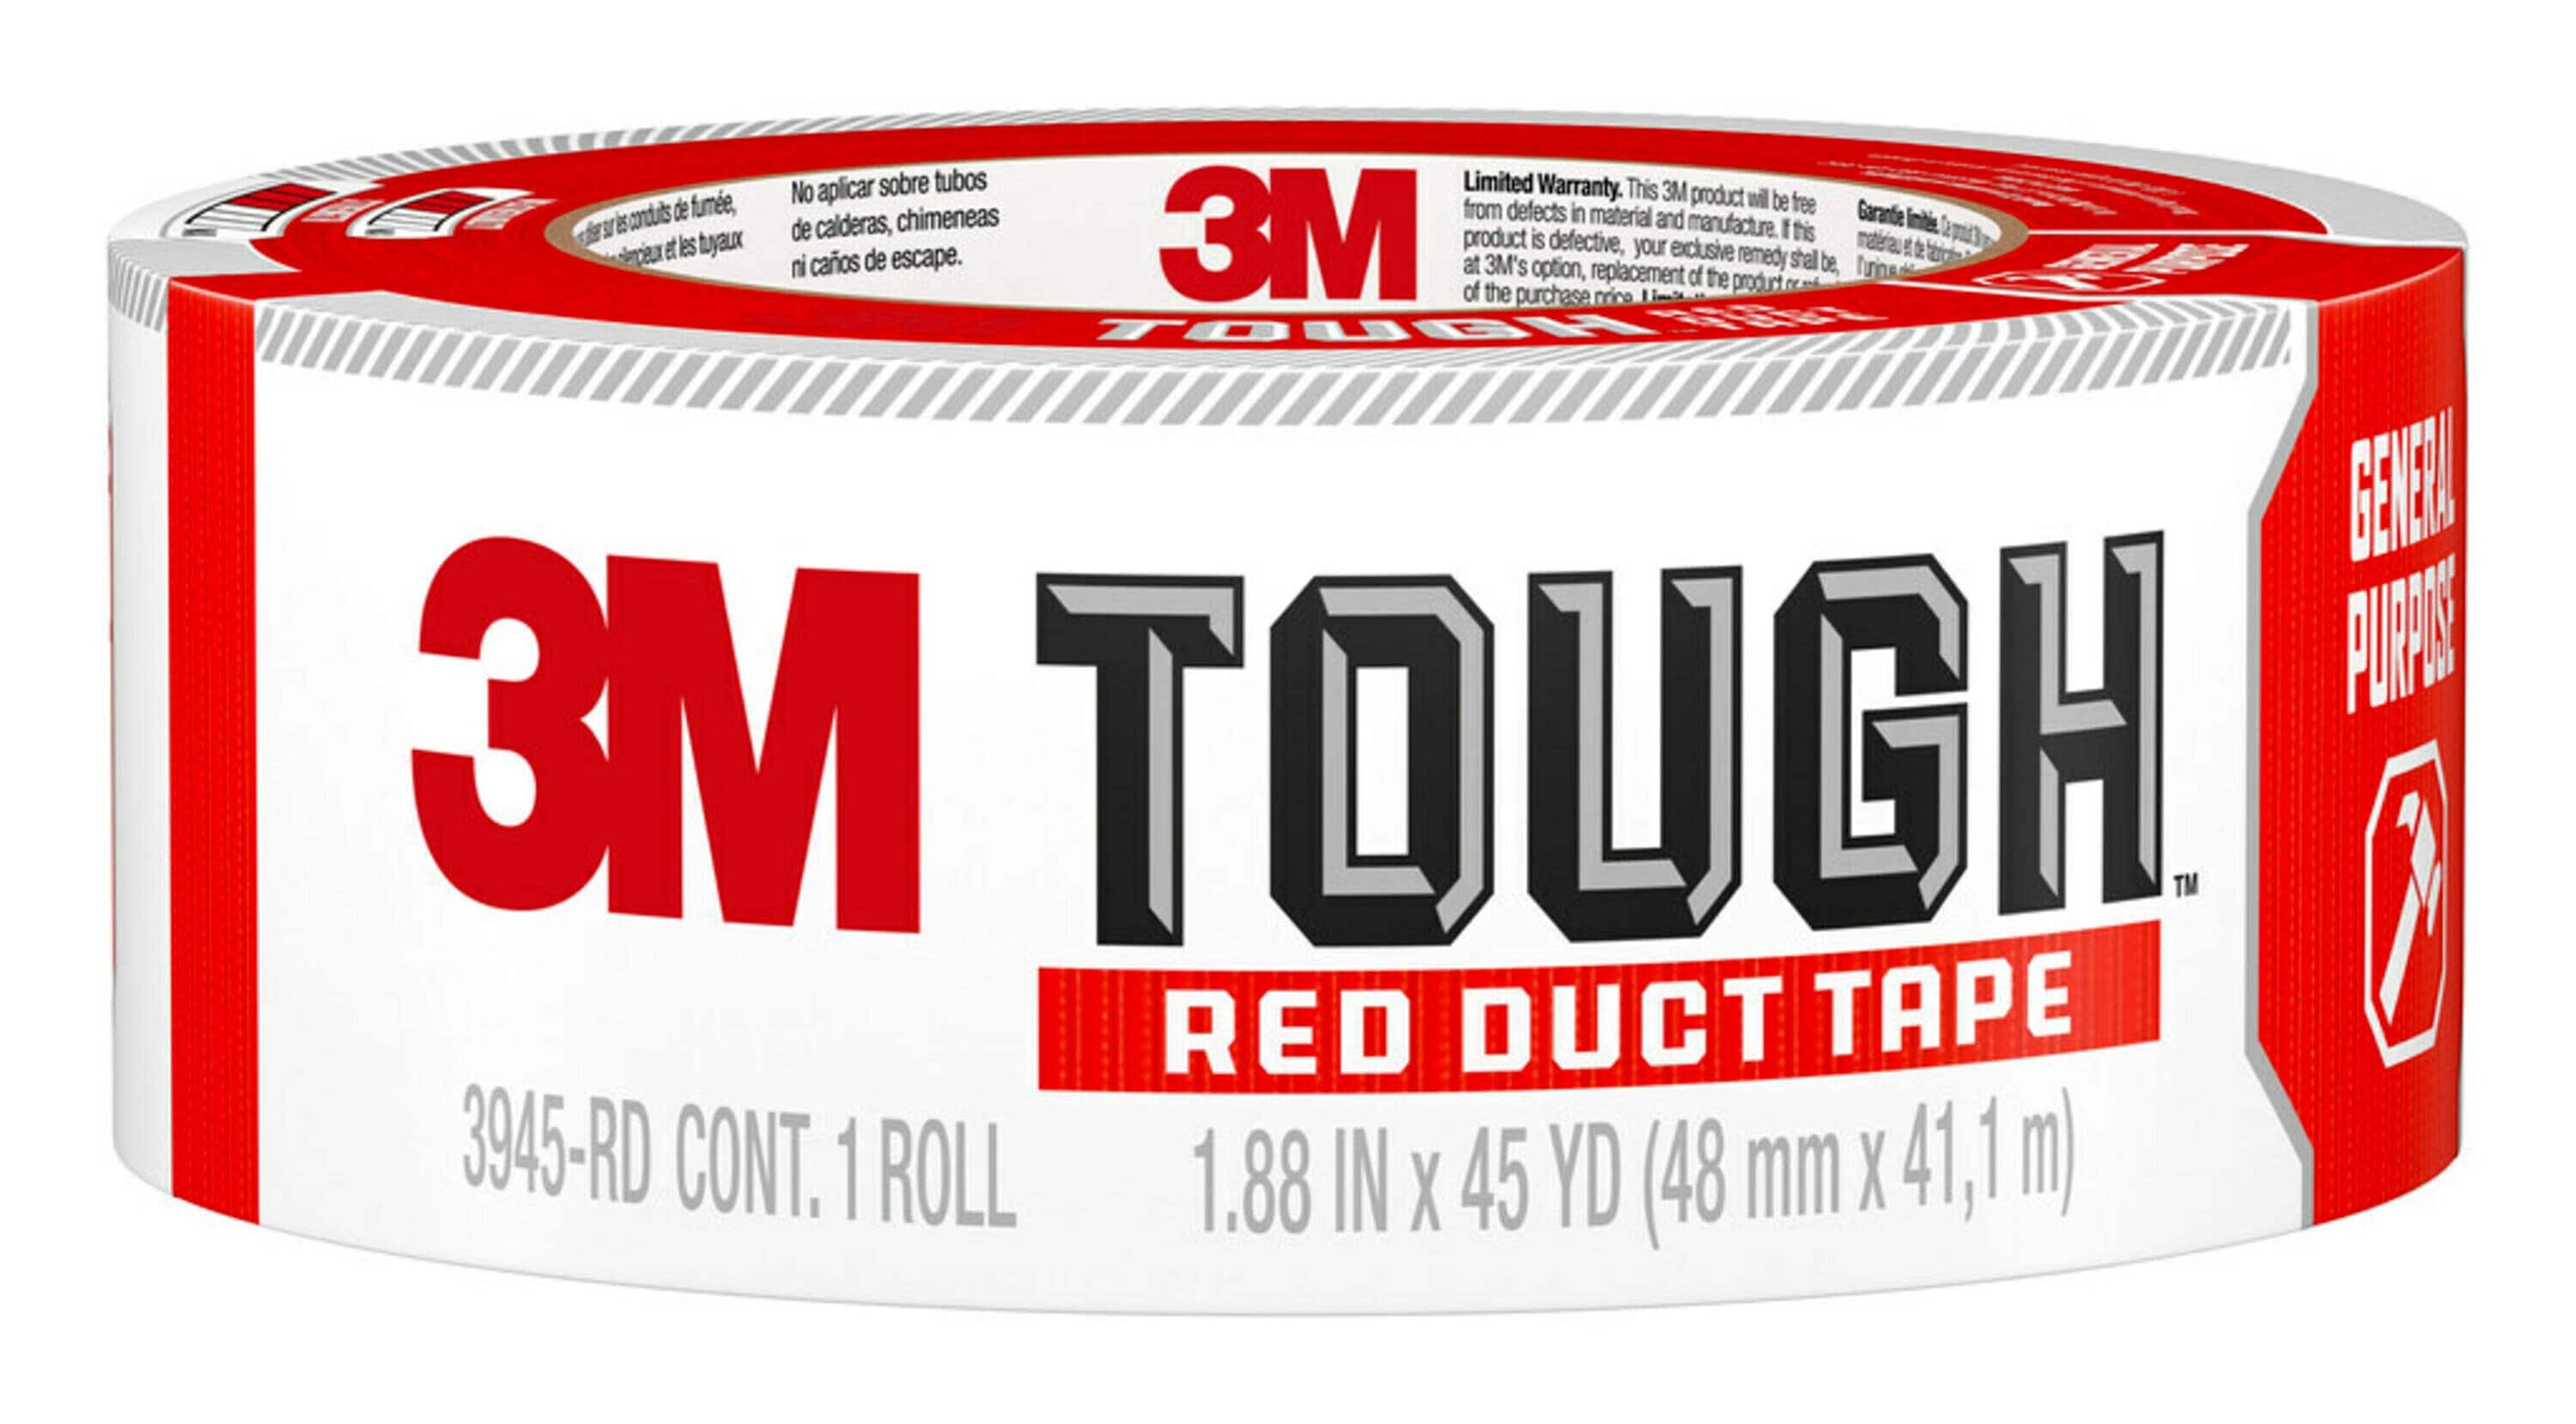 3M Clear Repair Tape, 1.88 inches x 20 yards, 1 Roll